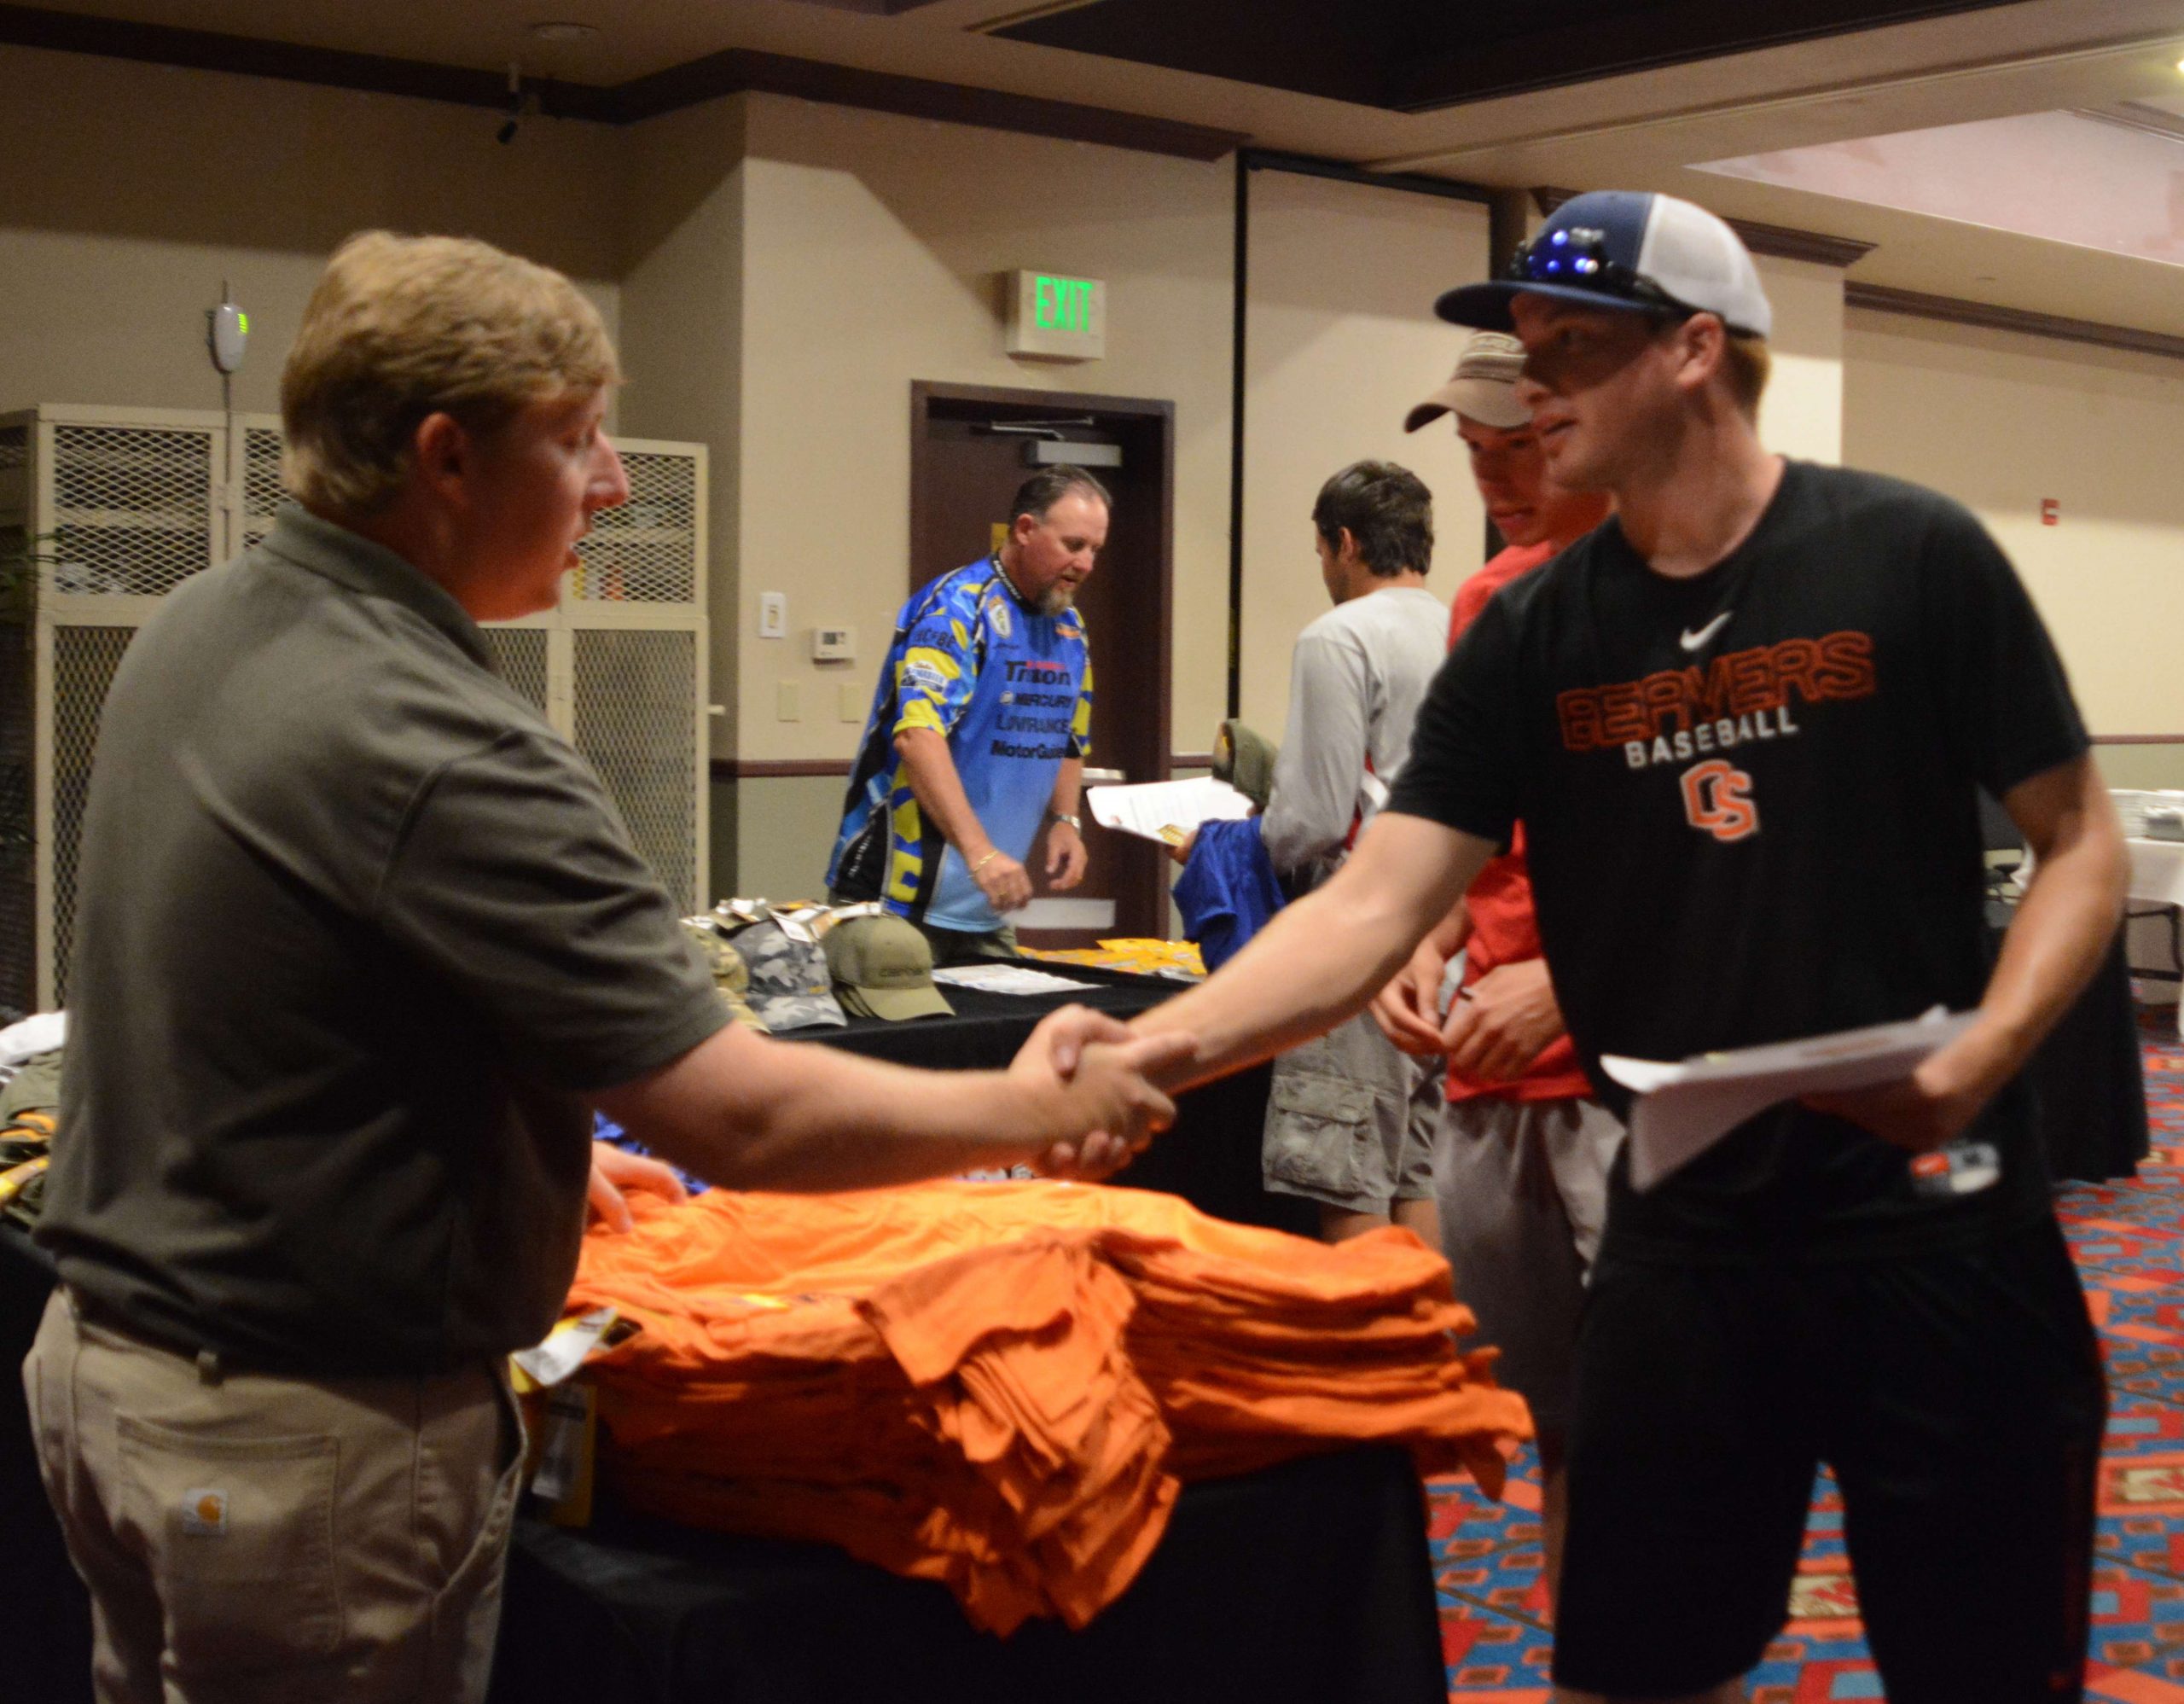 Hank Weldon, College B.A.S.S. manager, welcomes anglers to the sponsor table at registration.